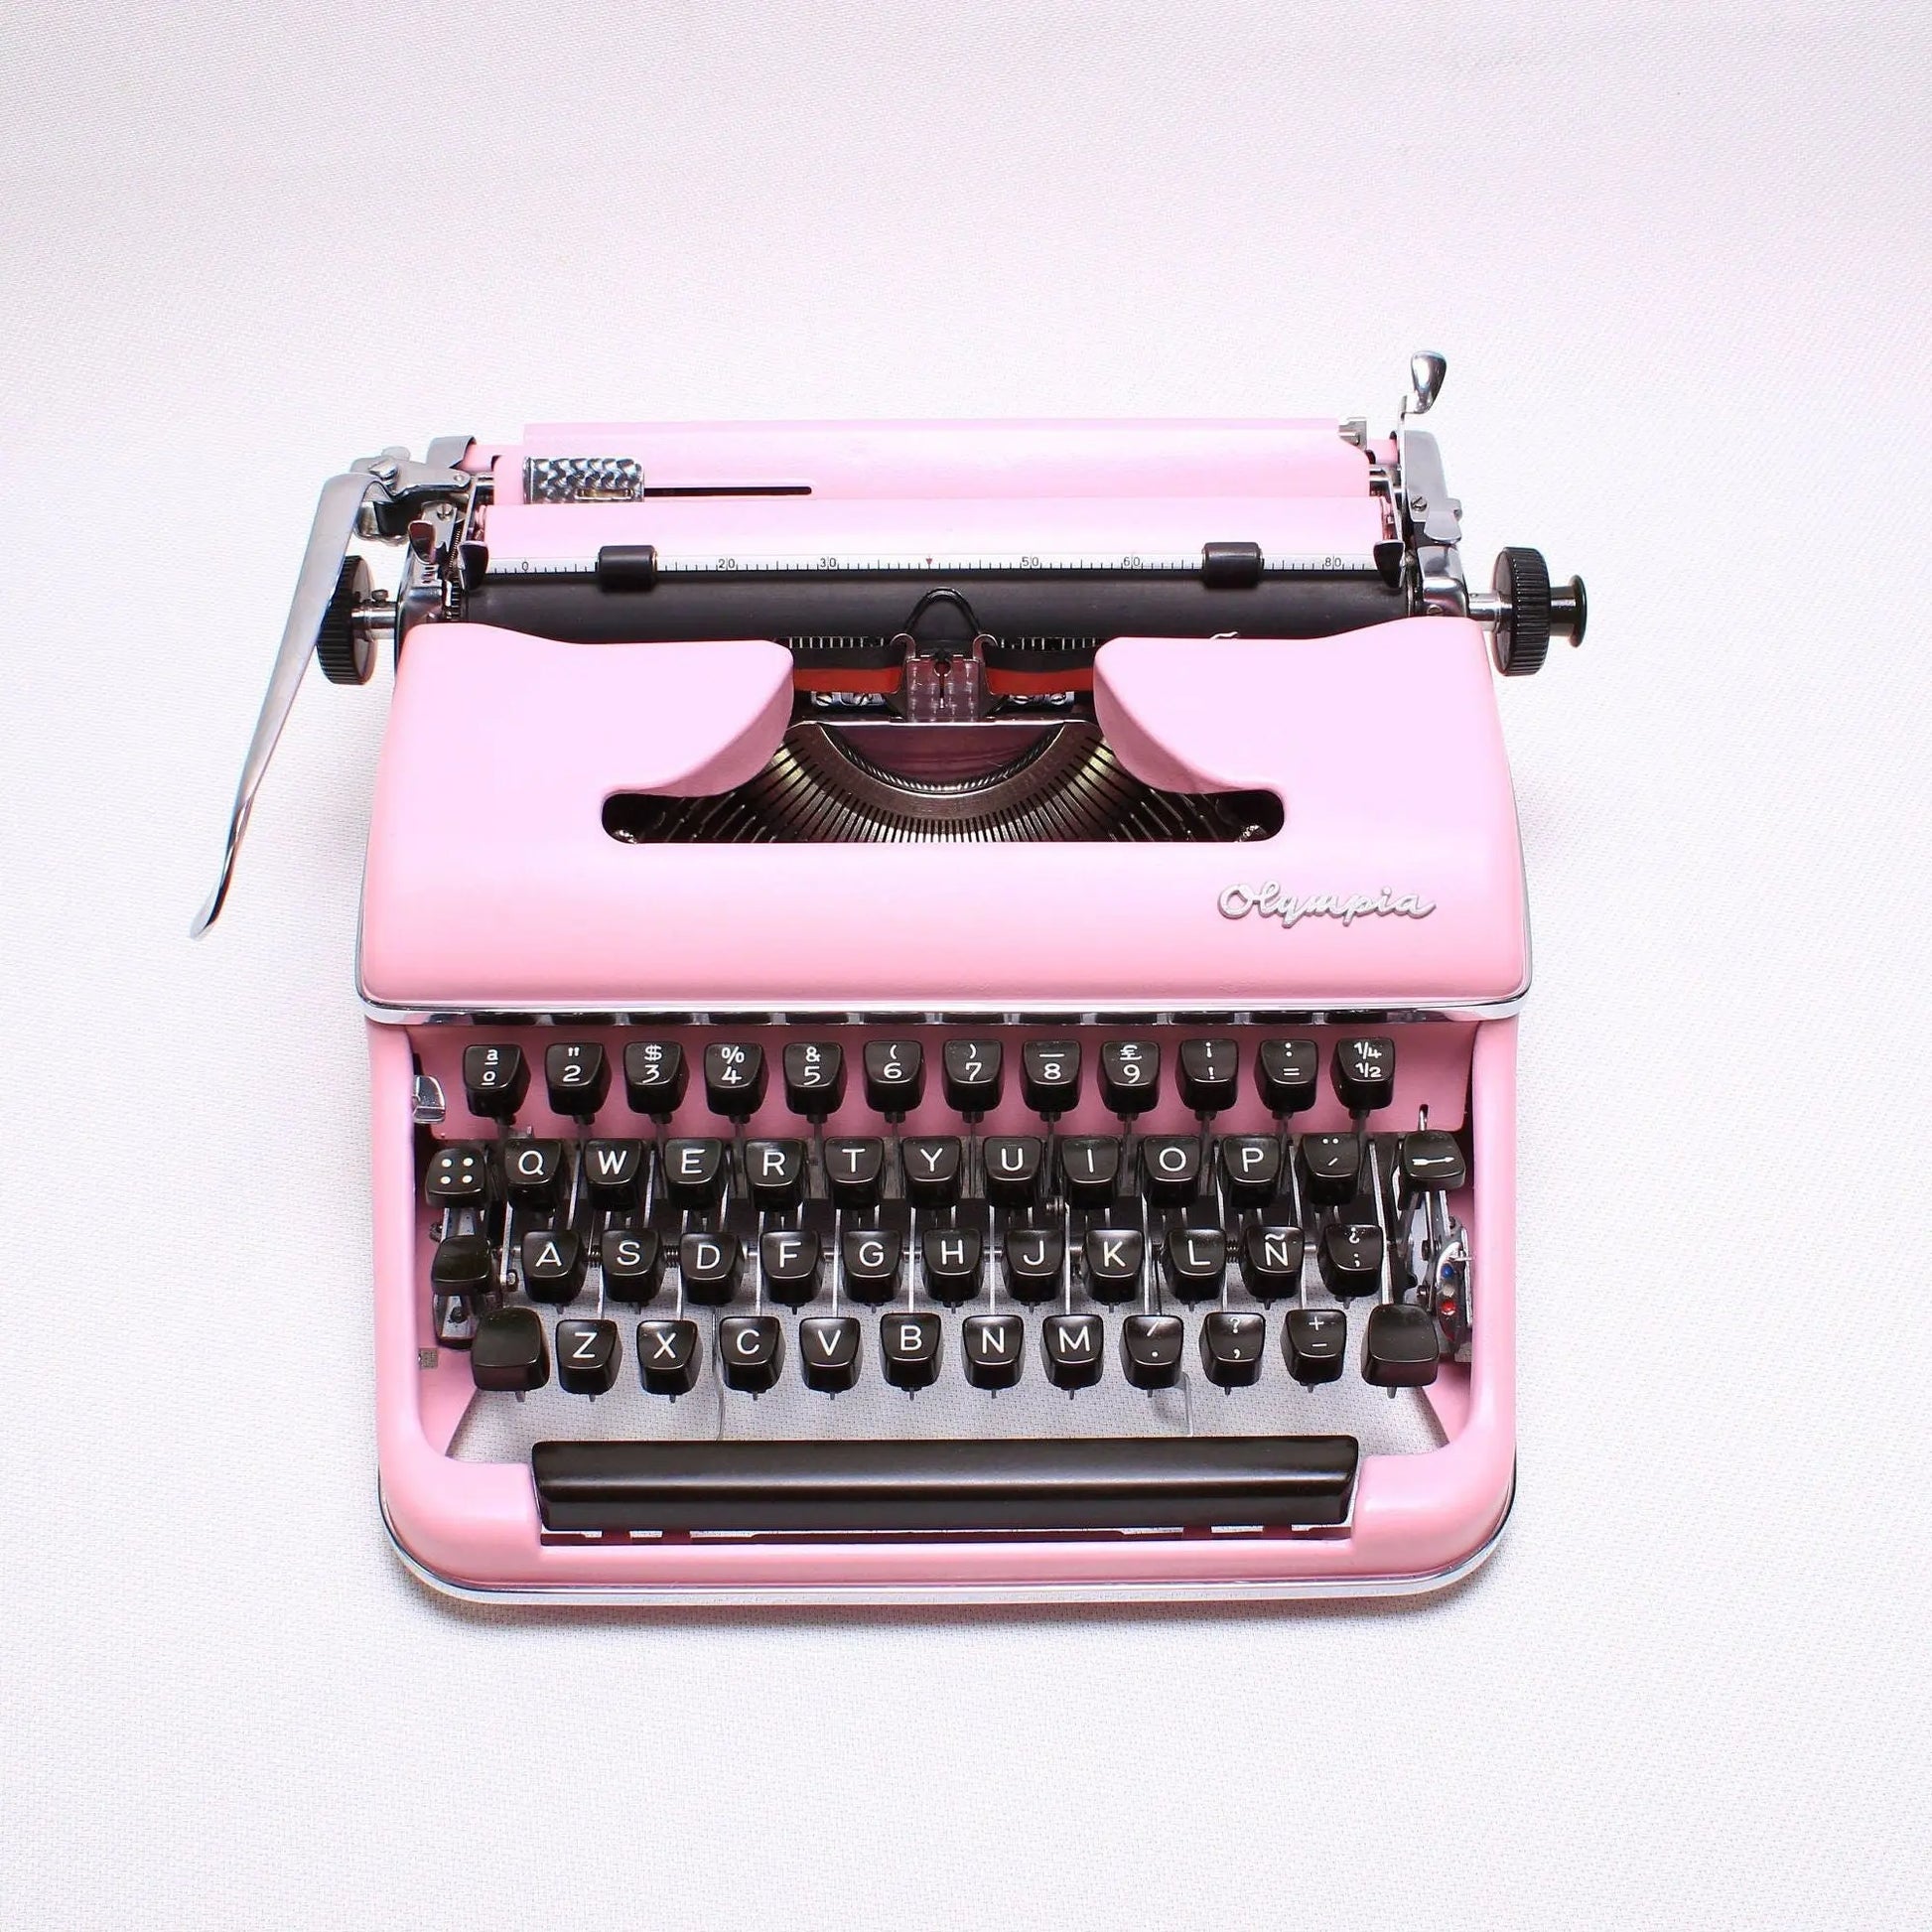 Olympia SM3 Flamingo Pink Typewriter, Vintage, Mint Condition, Manual Portable, Professionally Serviced by Typewriter.Company - ElGranero Typewriter.Company